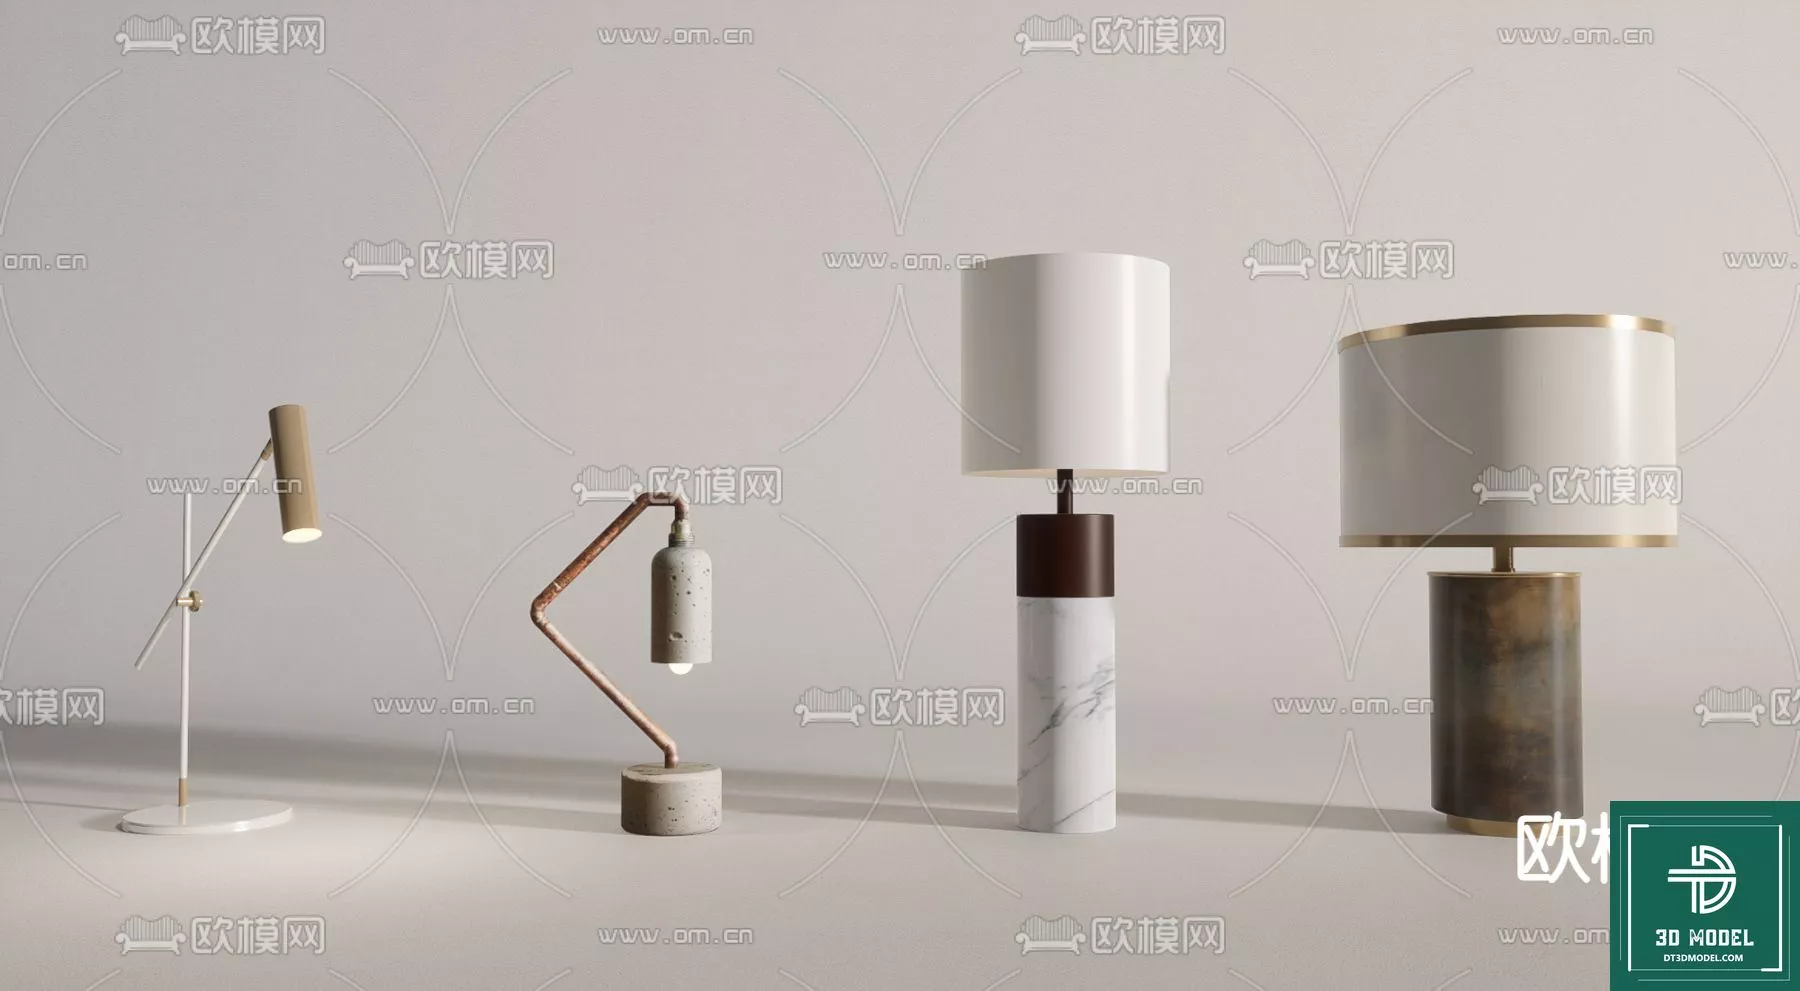 MODERN TABLE LAMP - SKETCHUP 3D MODEL - VRAY OR ENSCAPE - ID14563